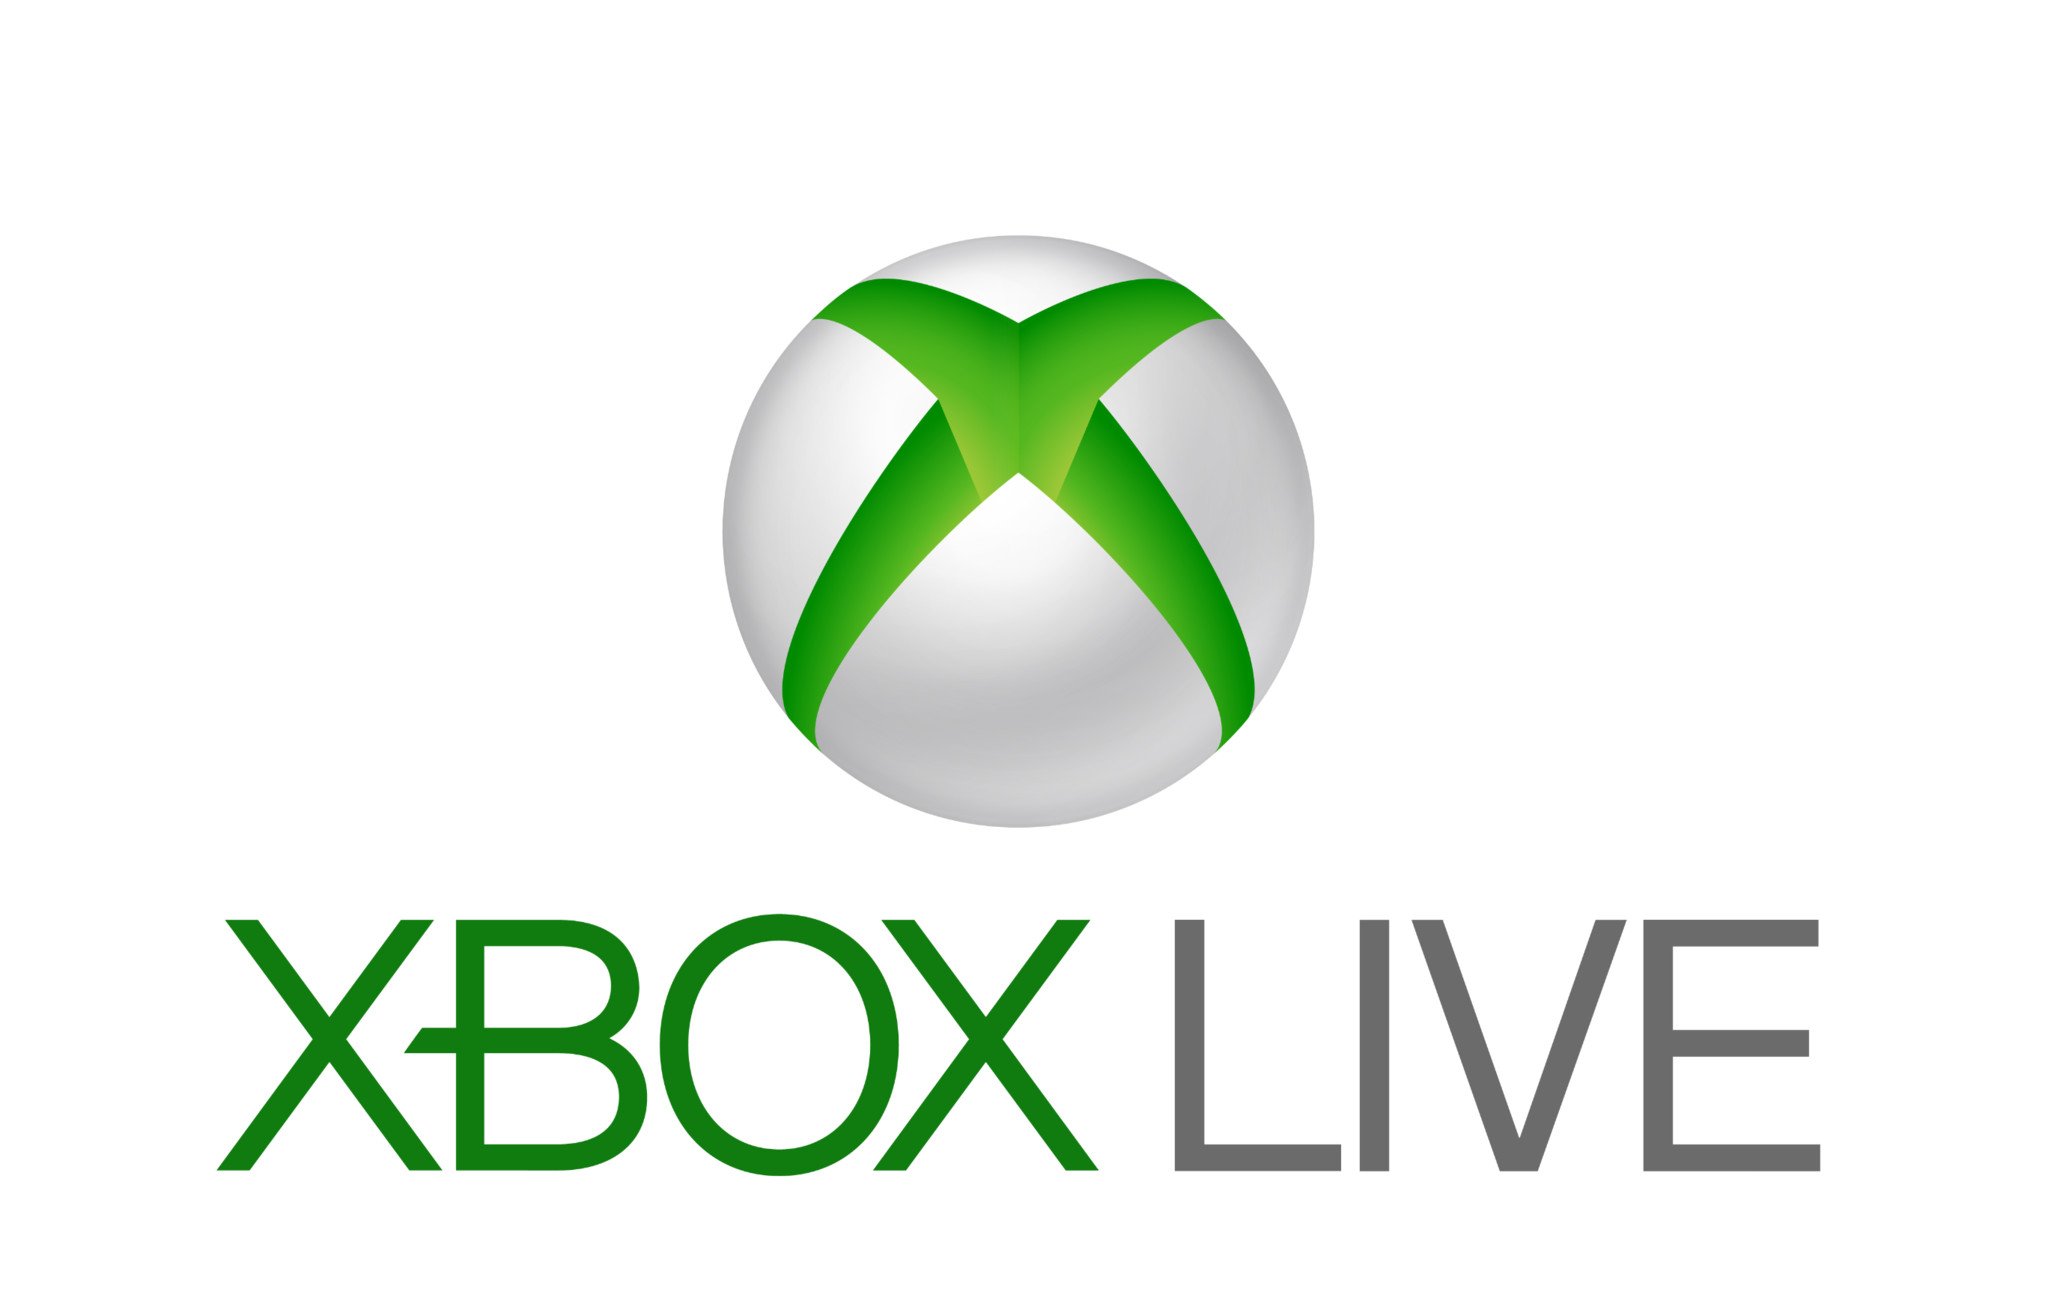 Microsoft is reportedly bringing Xbox Live to Android